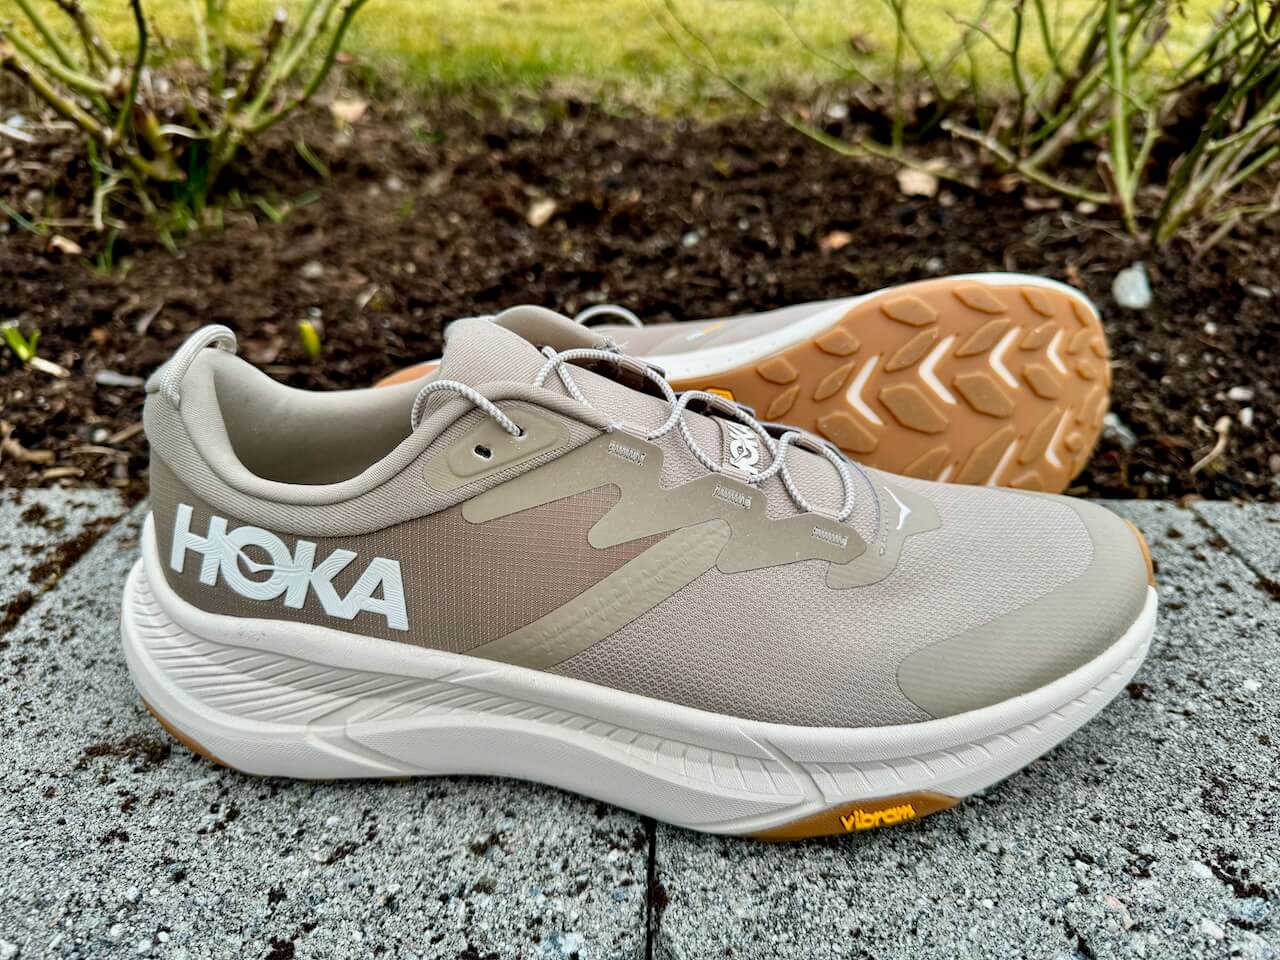 Featured image for “Test: HOKA Transport”